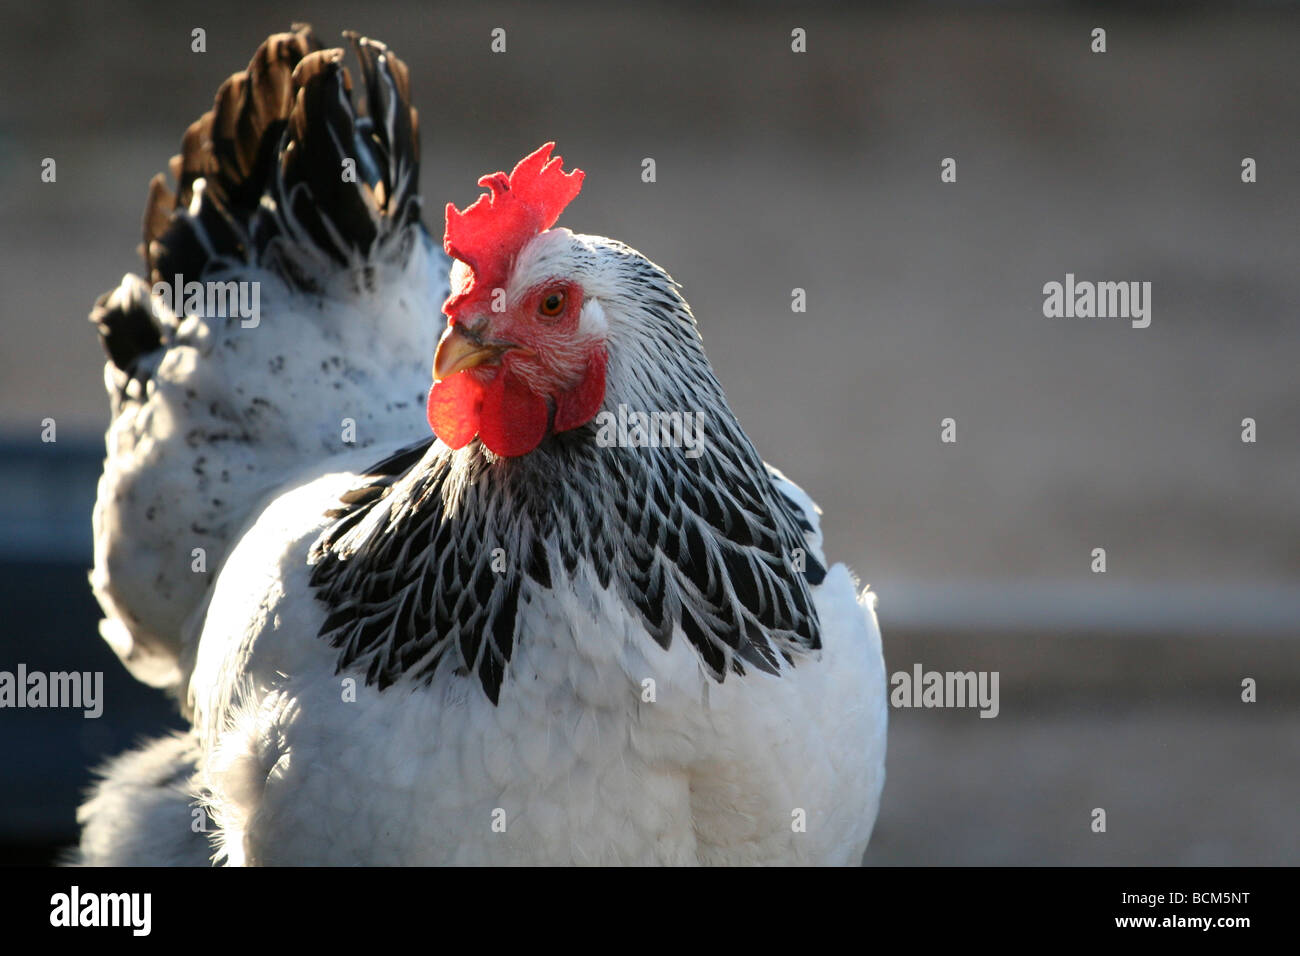 Giant chicken Brahma standing on ground in Farm area 8954225 Stock Photo at  Vecteezy